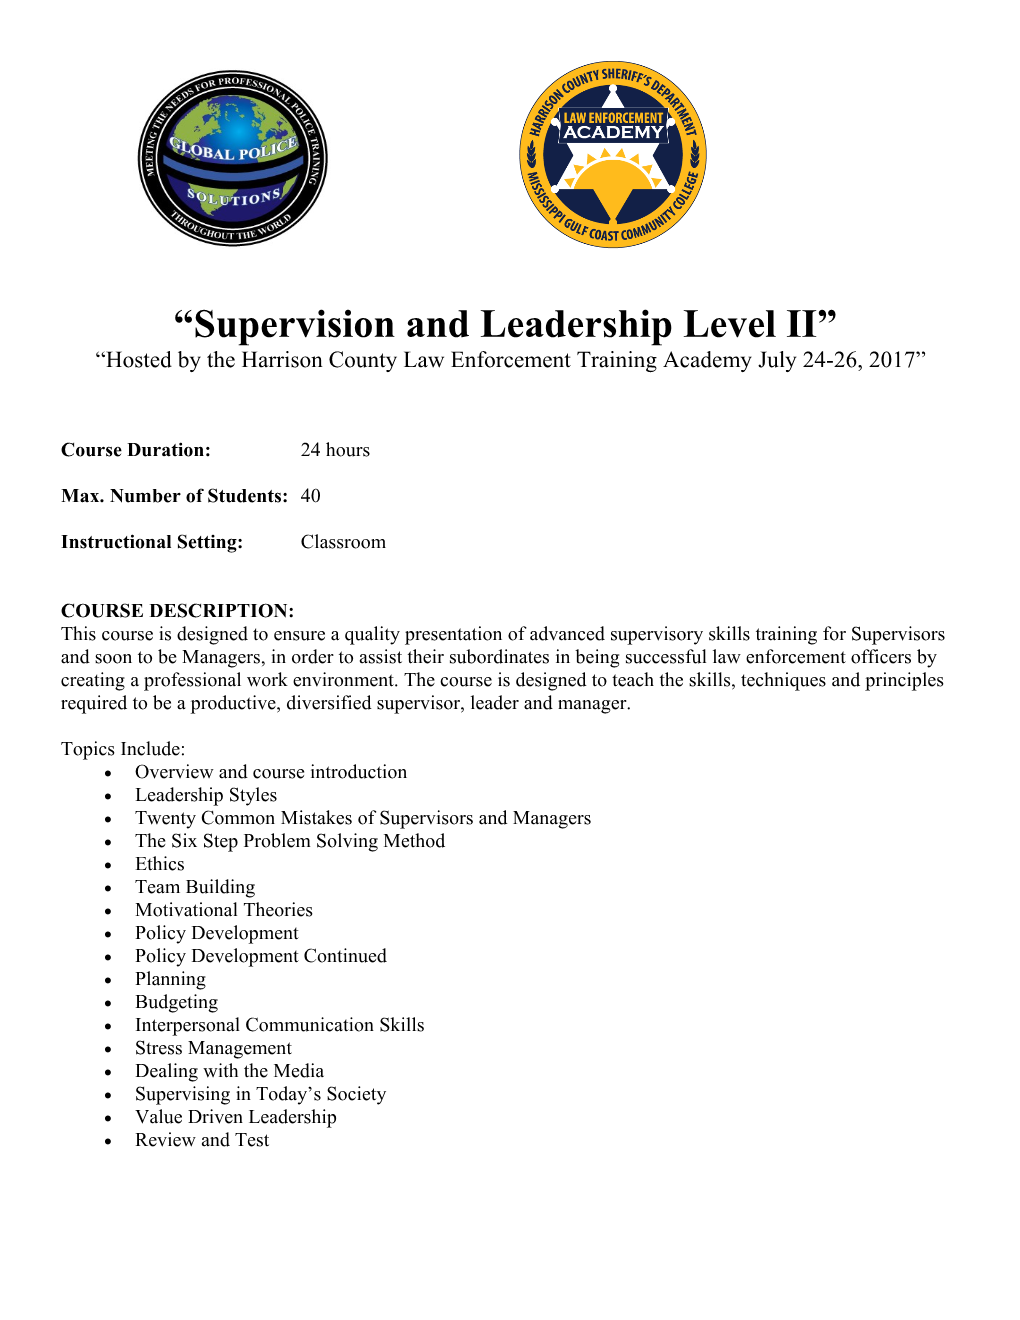 Supervision and Leadership Level II